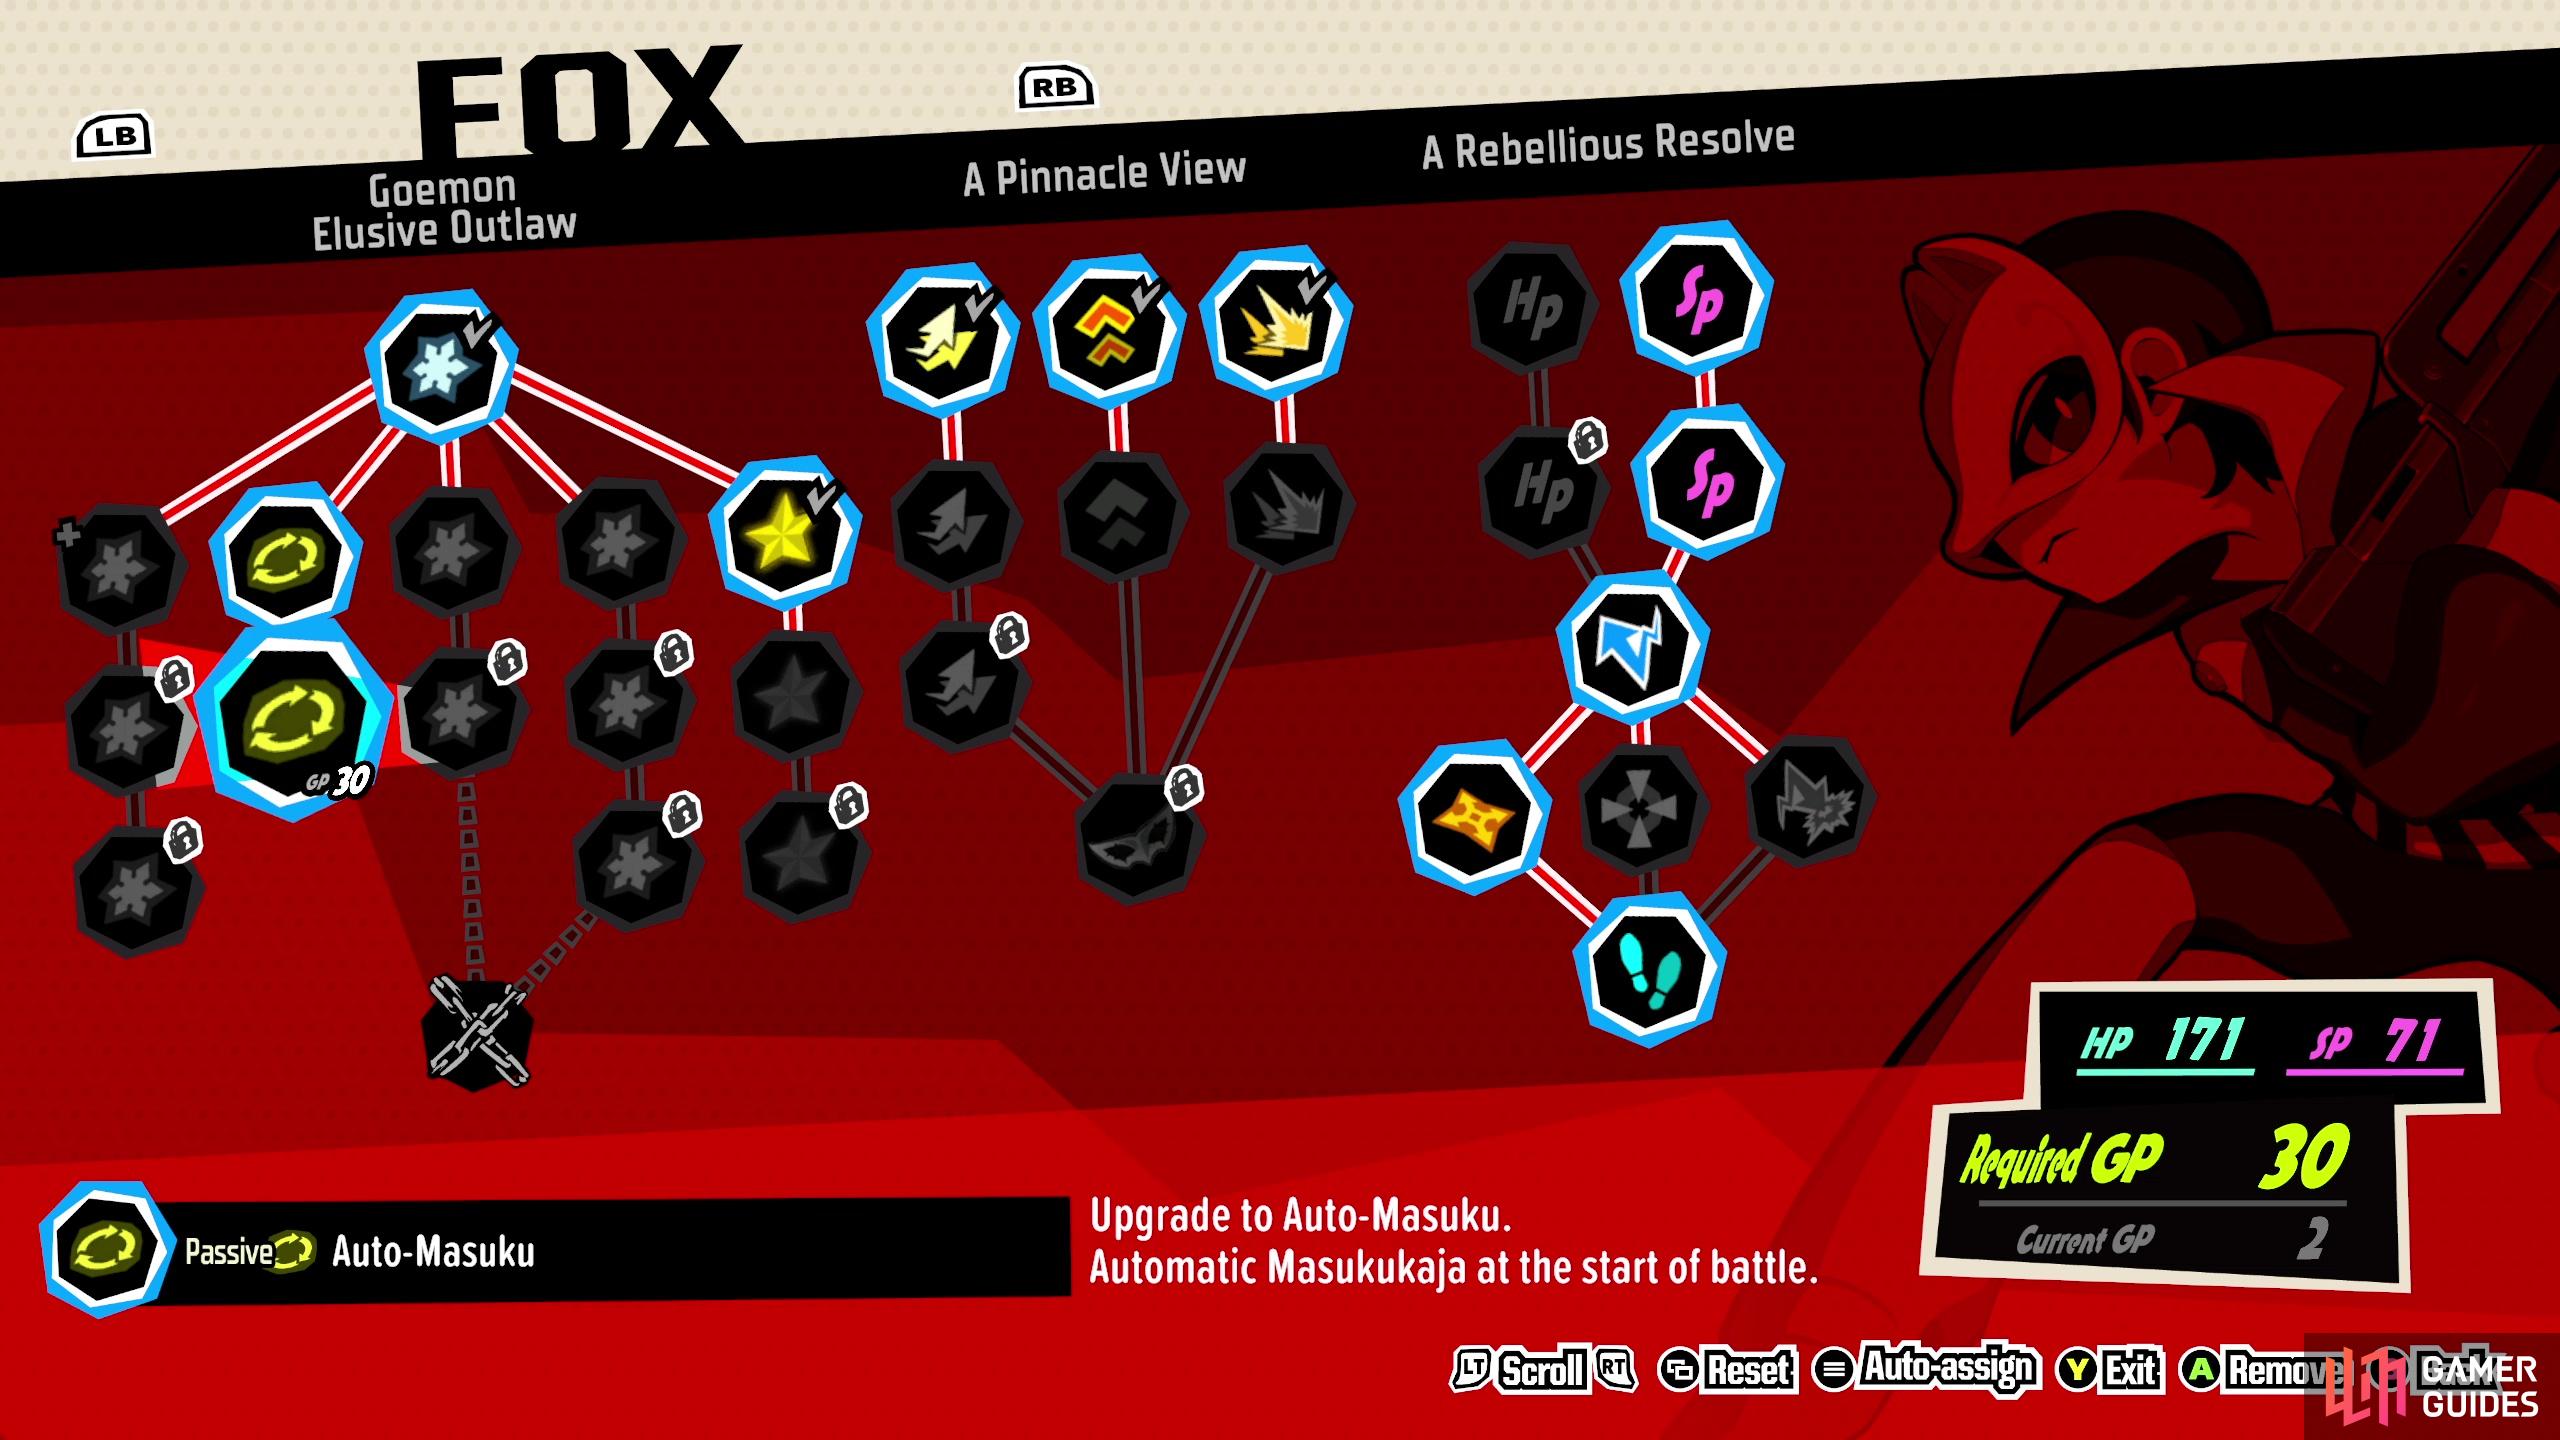 Auto-Masuku gives the entire party the Sukukaja buff at the start of combat, making it the crown jewel of Yusuke's skill tree.